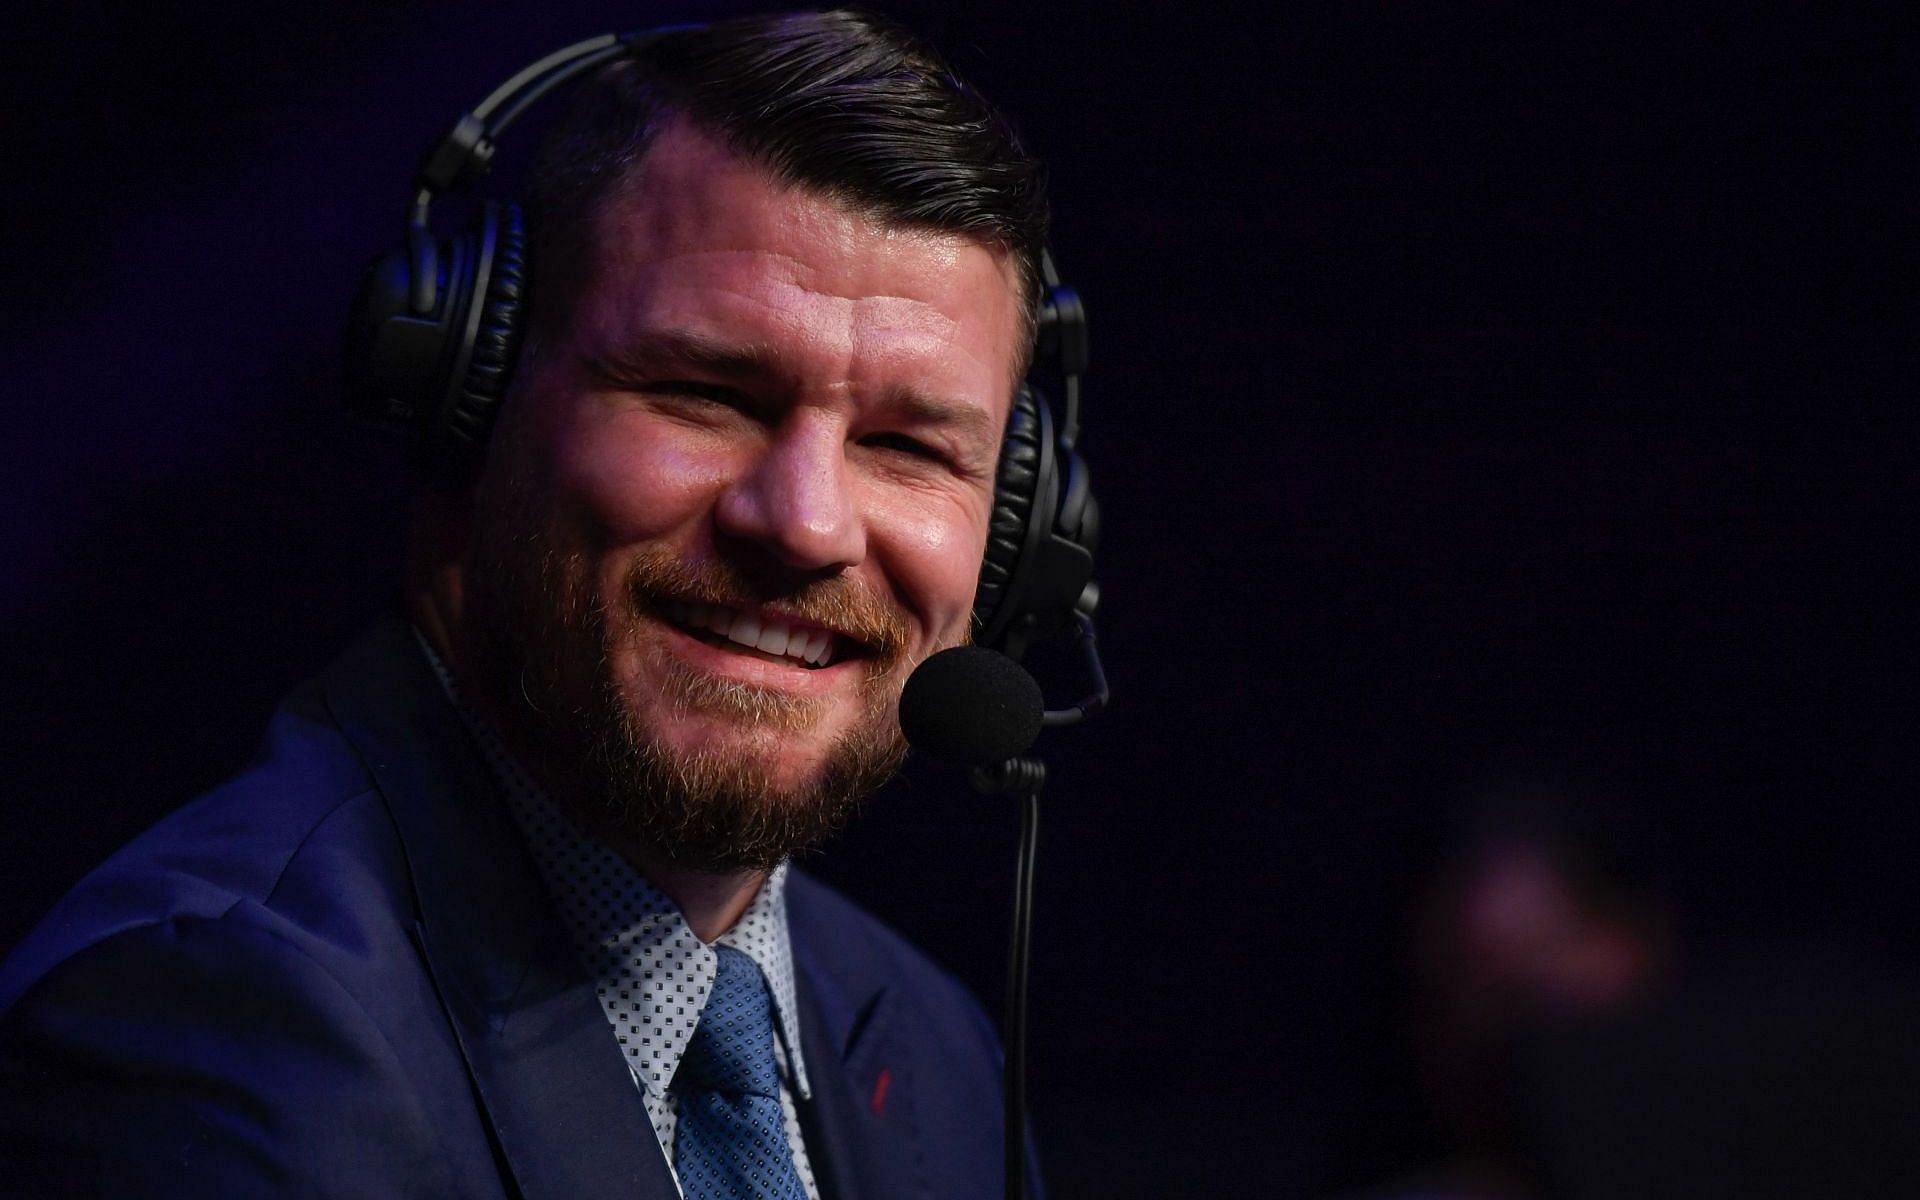 Michael Bisping reveals that a documentary about his life is scheduled to be released soon